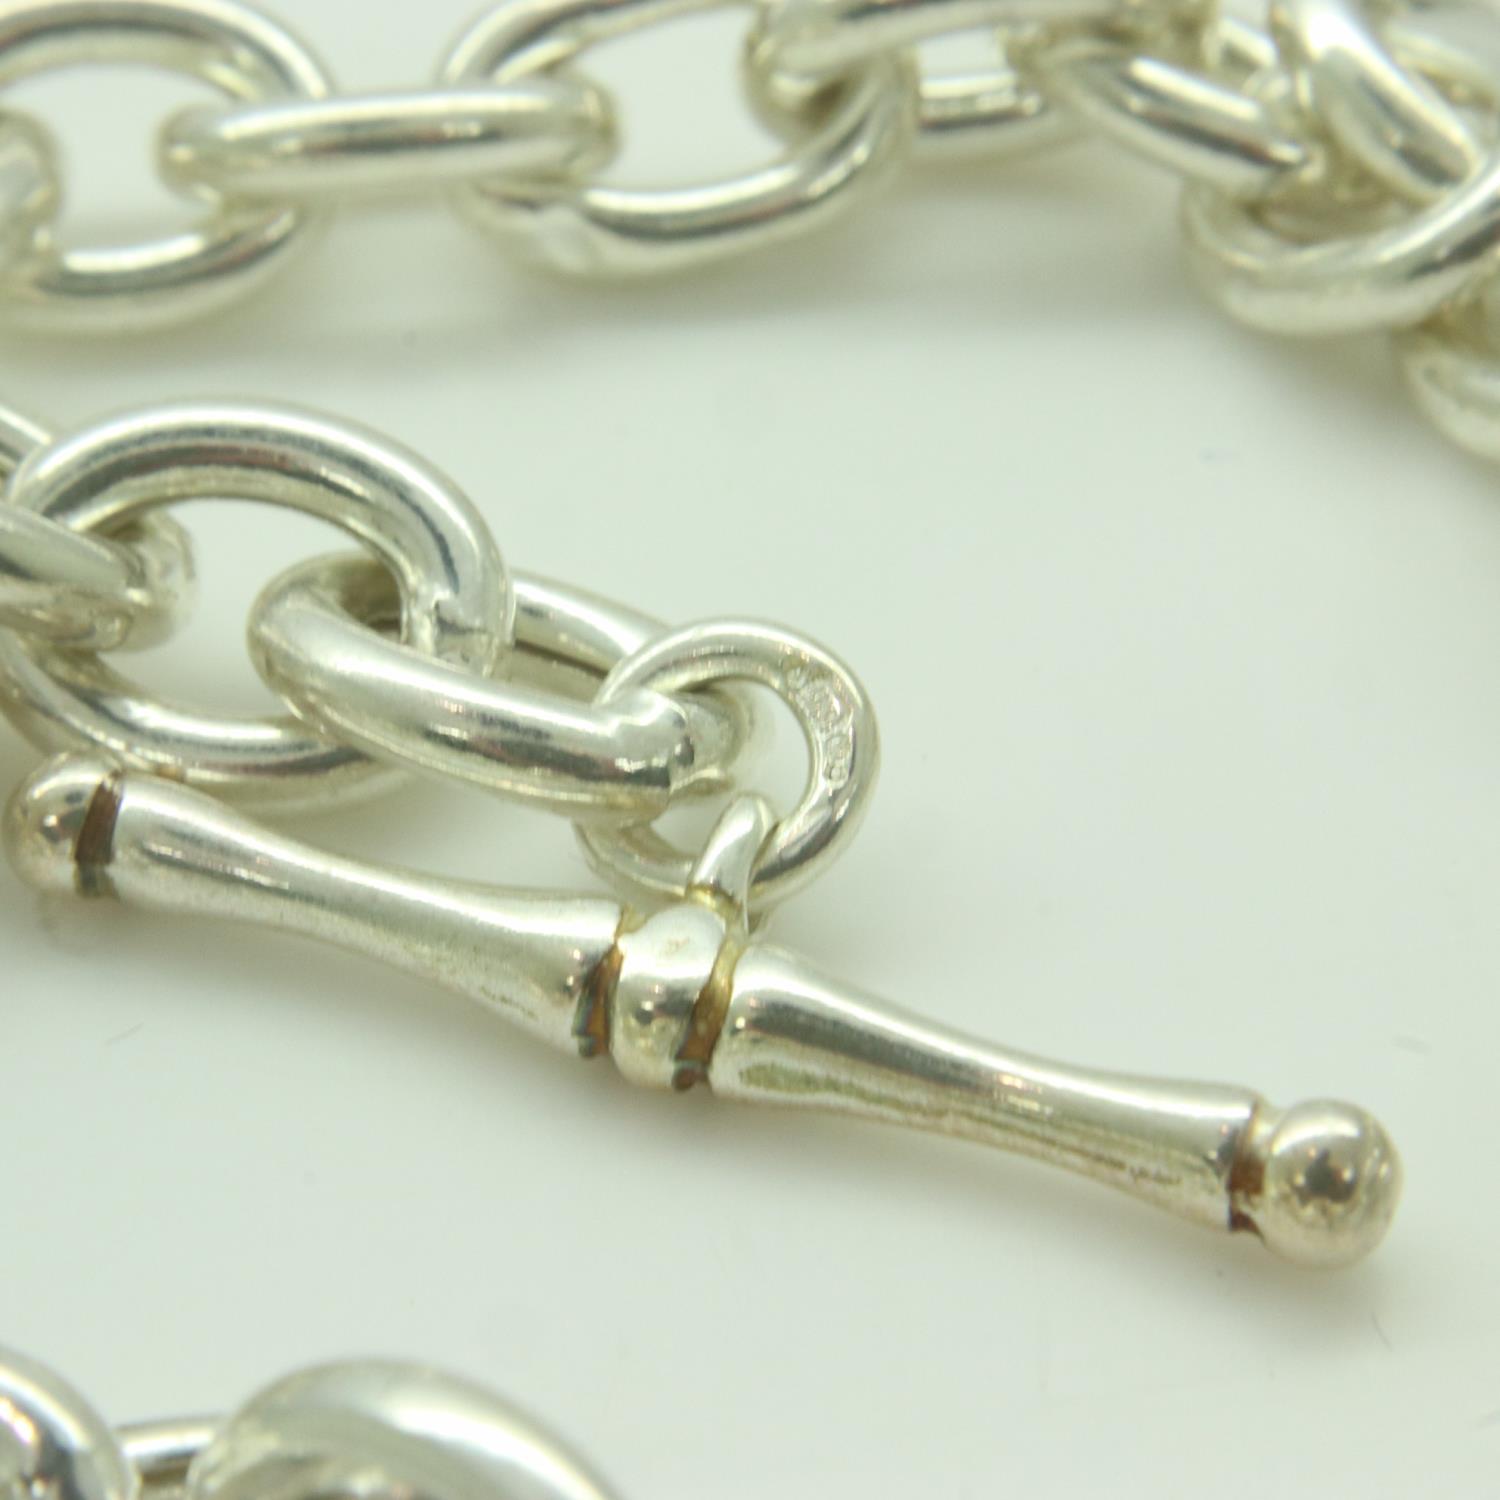 Silver T-bar necklace, L: 44 cm, 39g. UK P&P Group 0 (£6+VAT for the first lot and £1+VAT for - Image 2 of 2